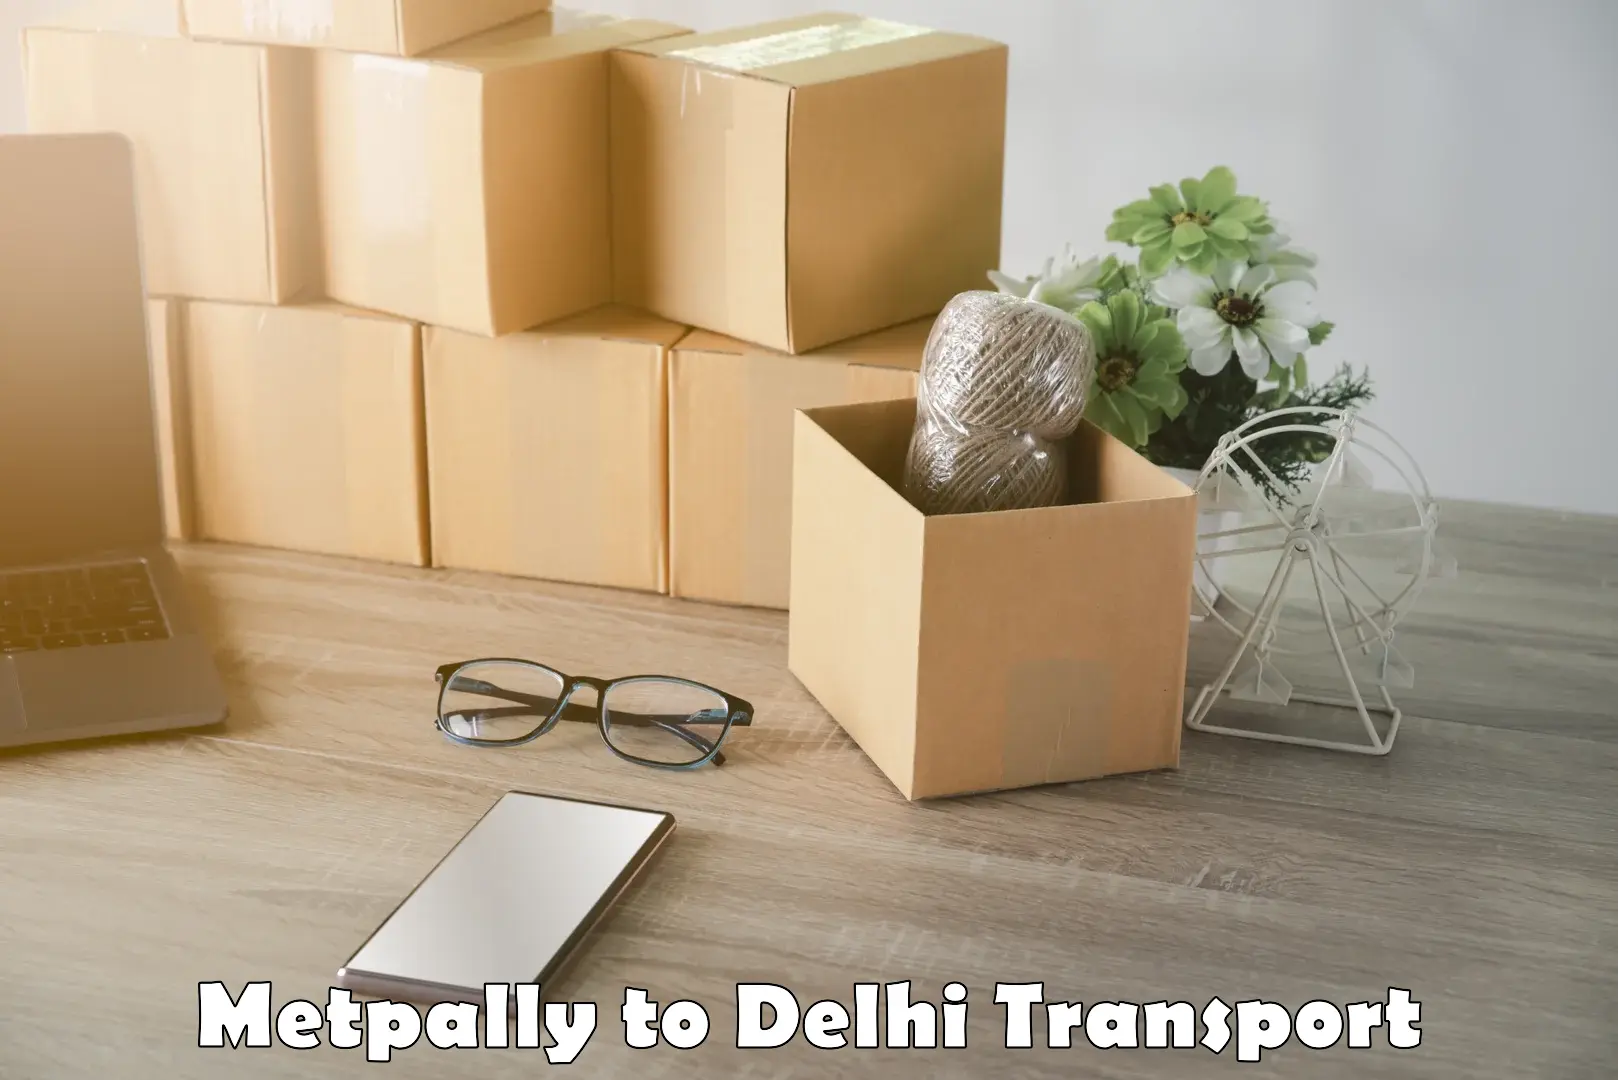 Transport shared services Metpally to Delhi